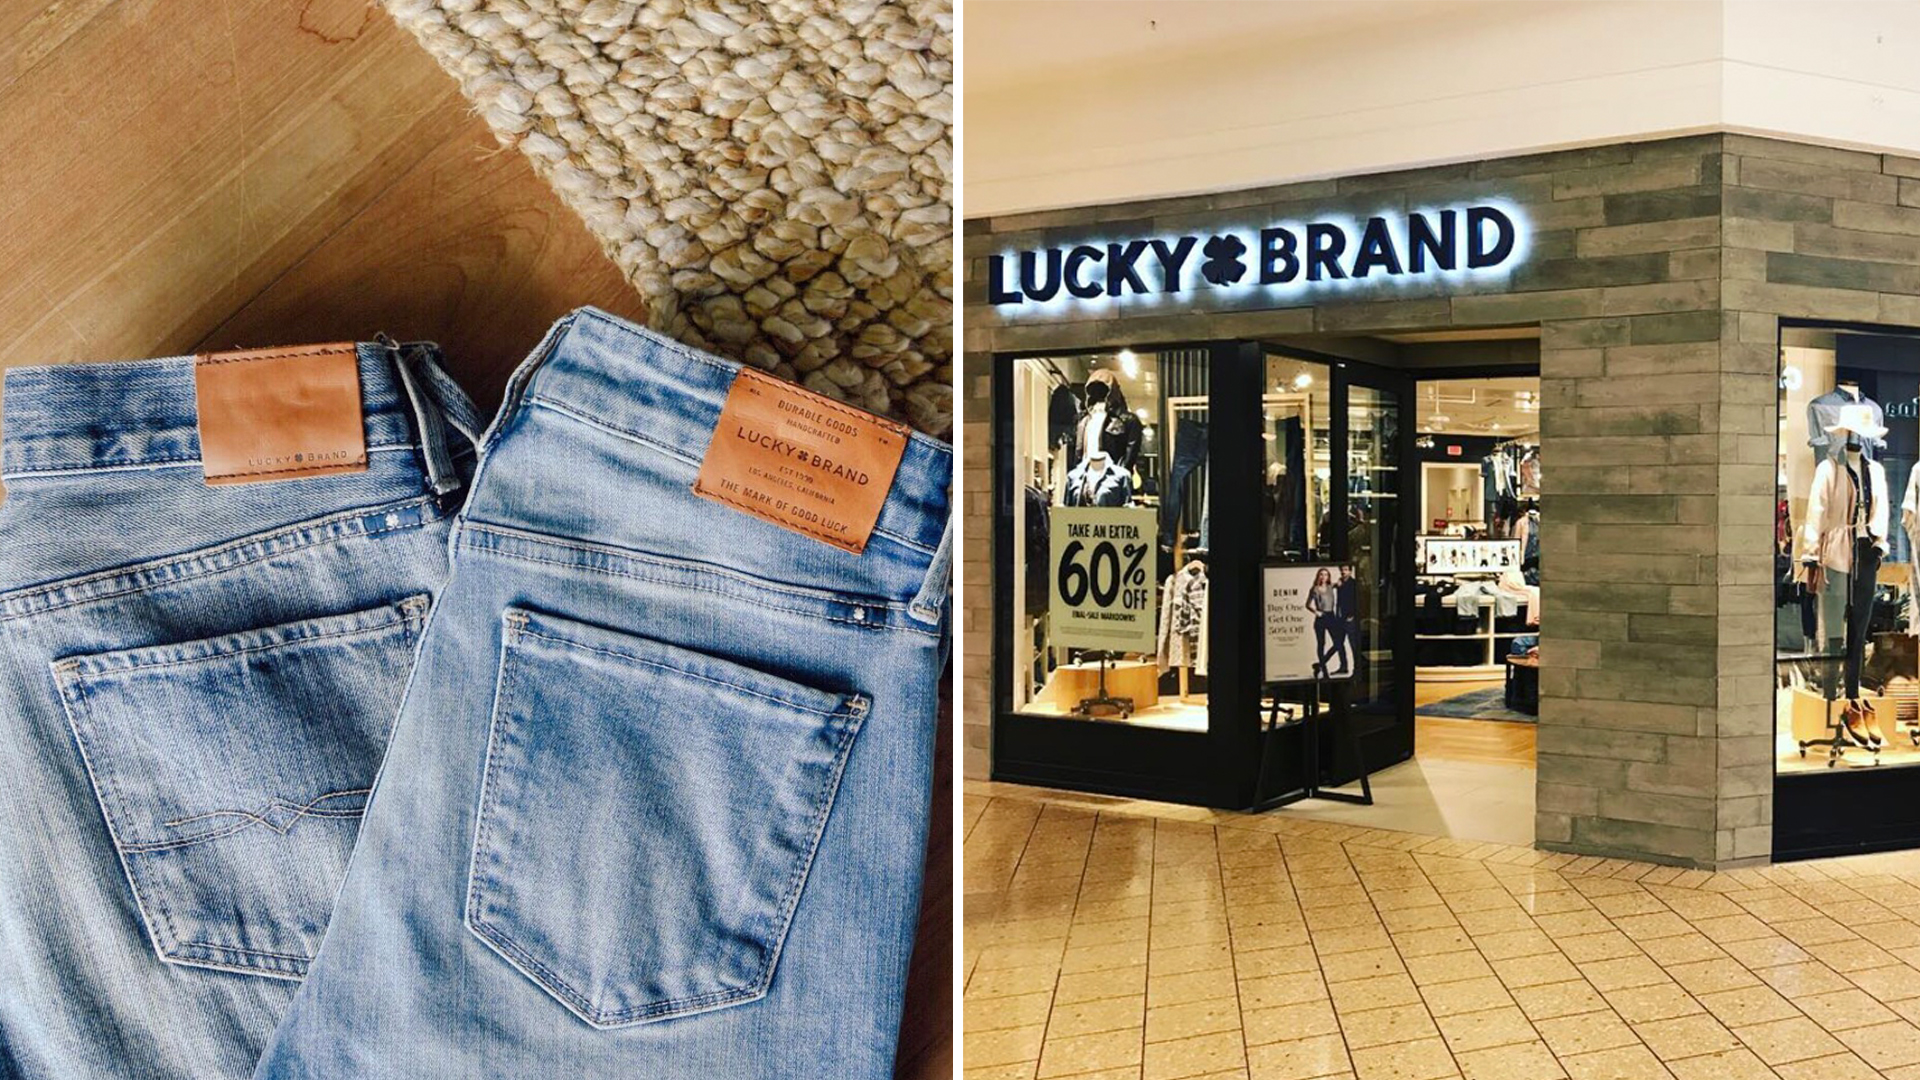 Lucky Brand Jeans Re-Enters Canada with Multiple Storefronts in